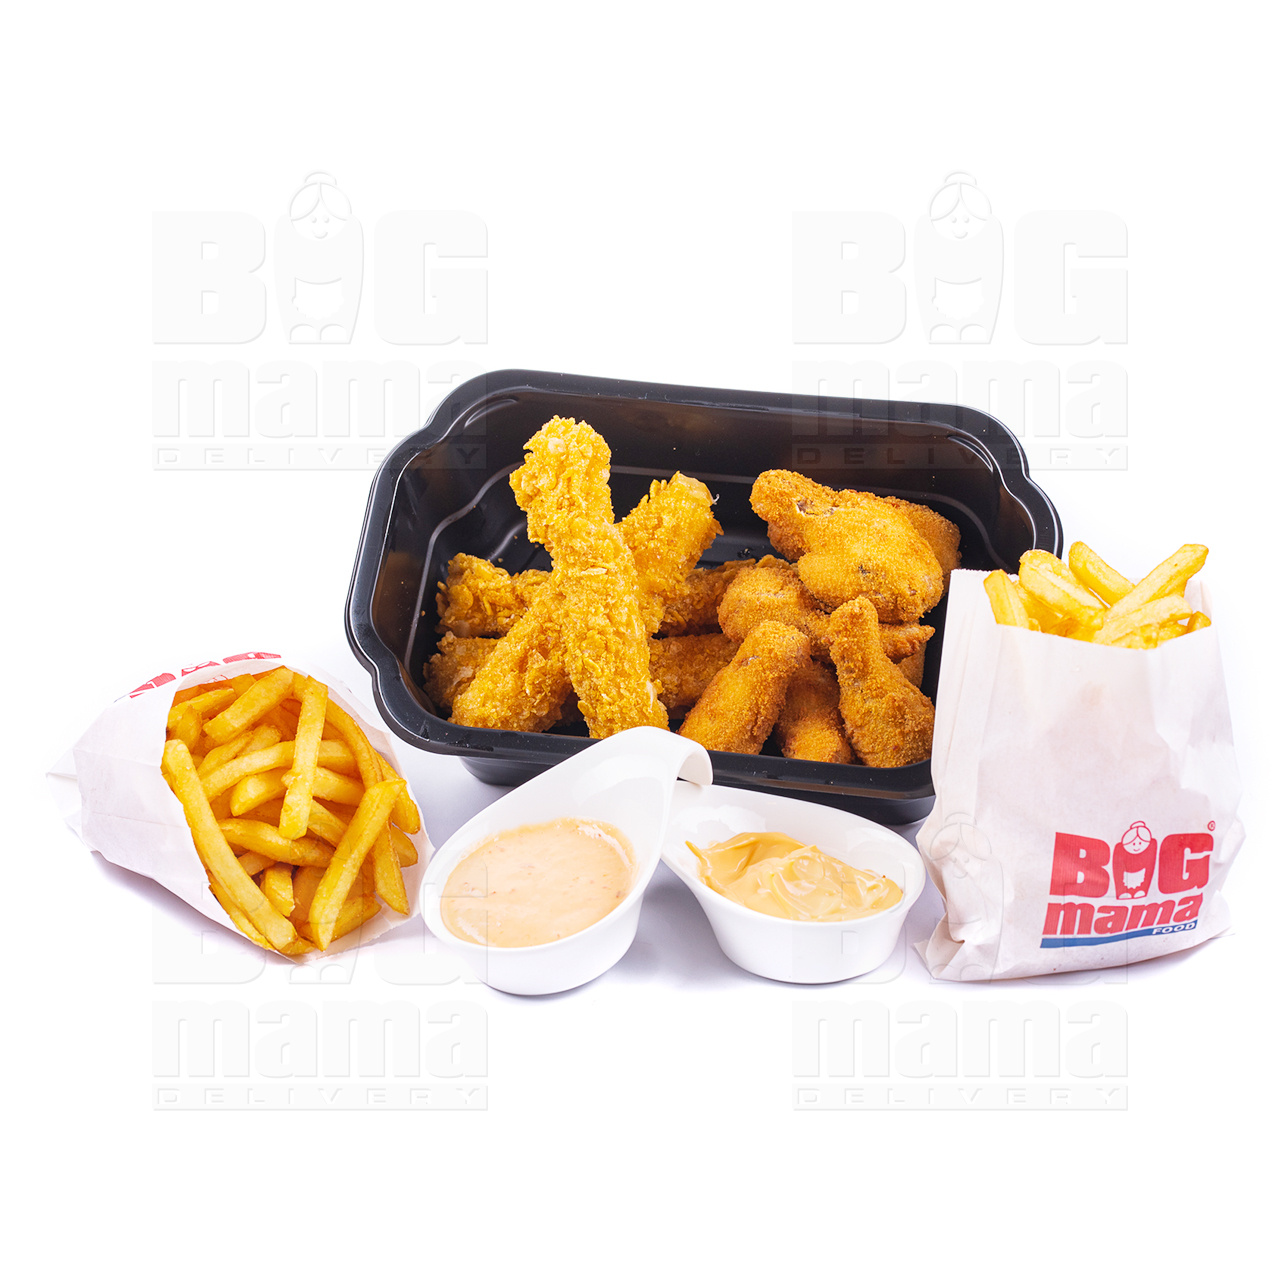 Product #228 image - Fried chicken wings, crispy cheese menu